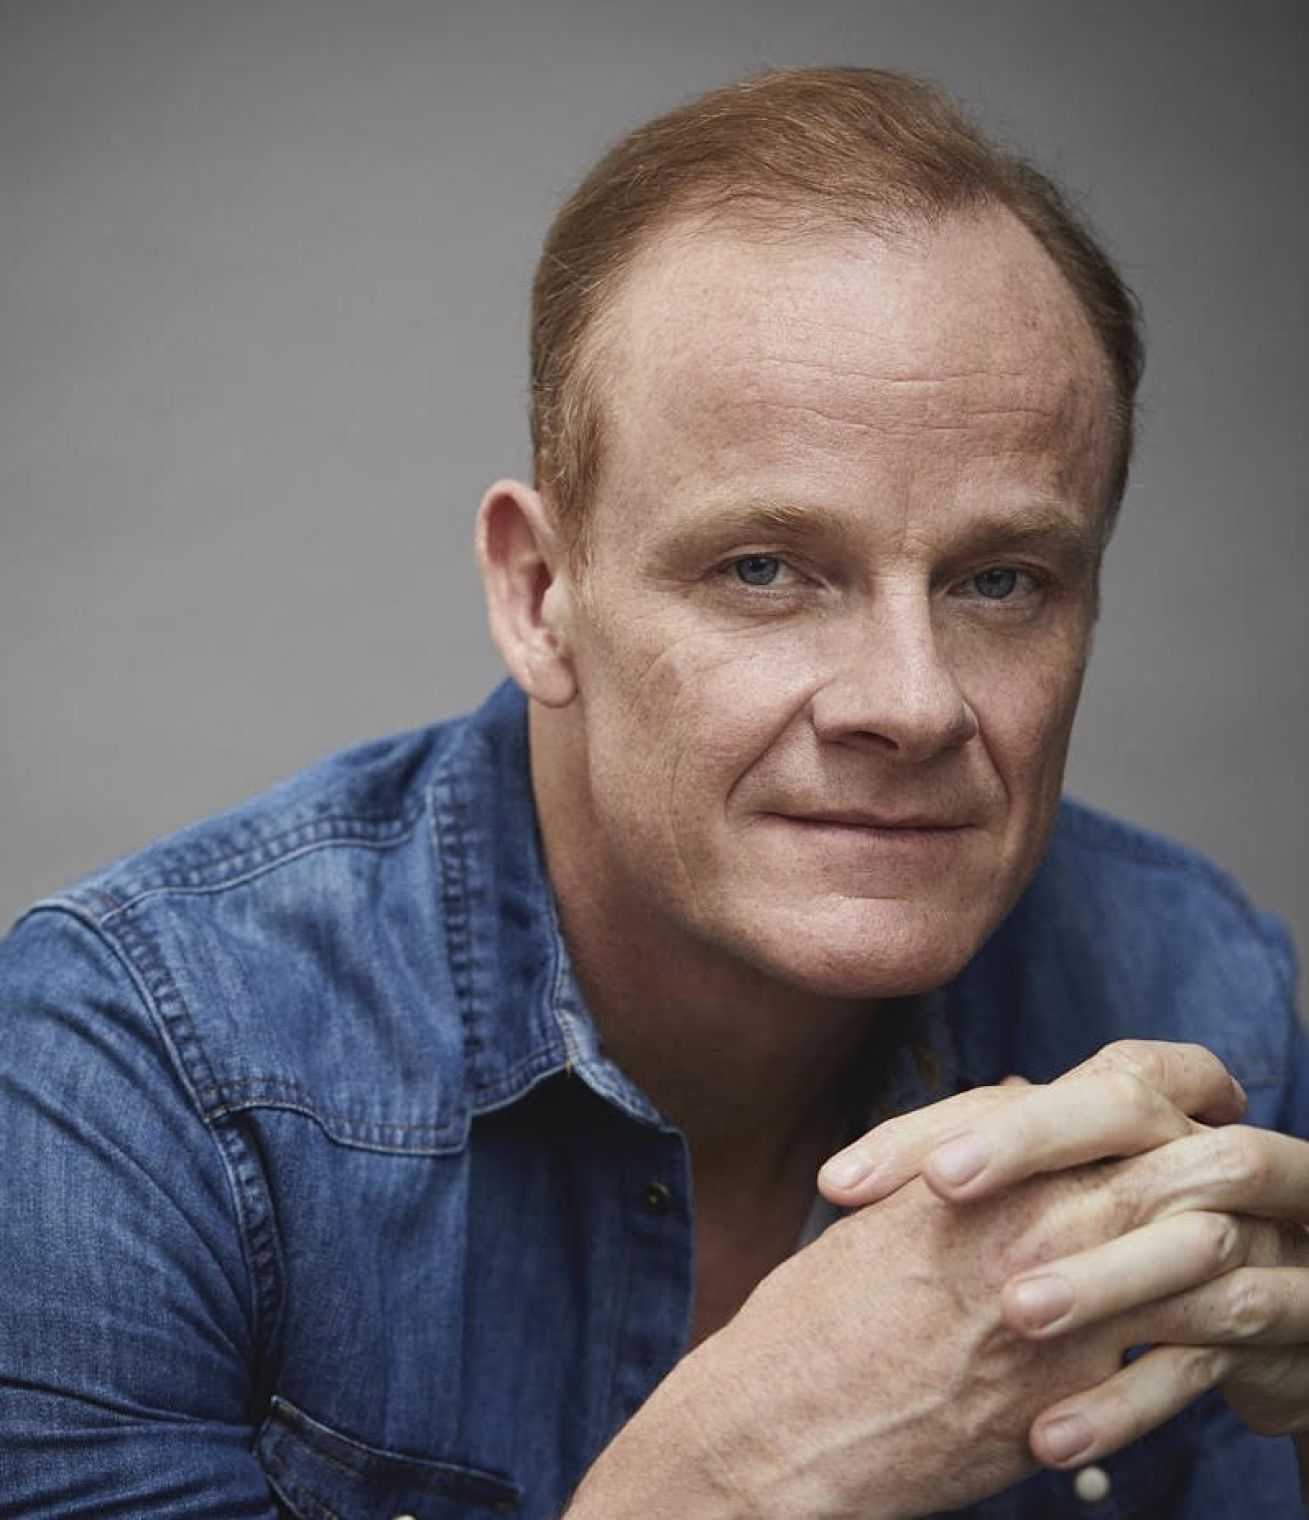 Alistair Petrie to star in Sky's new comedy 'Funny Woman' set in 1960s London